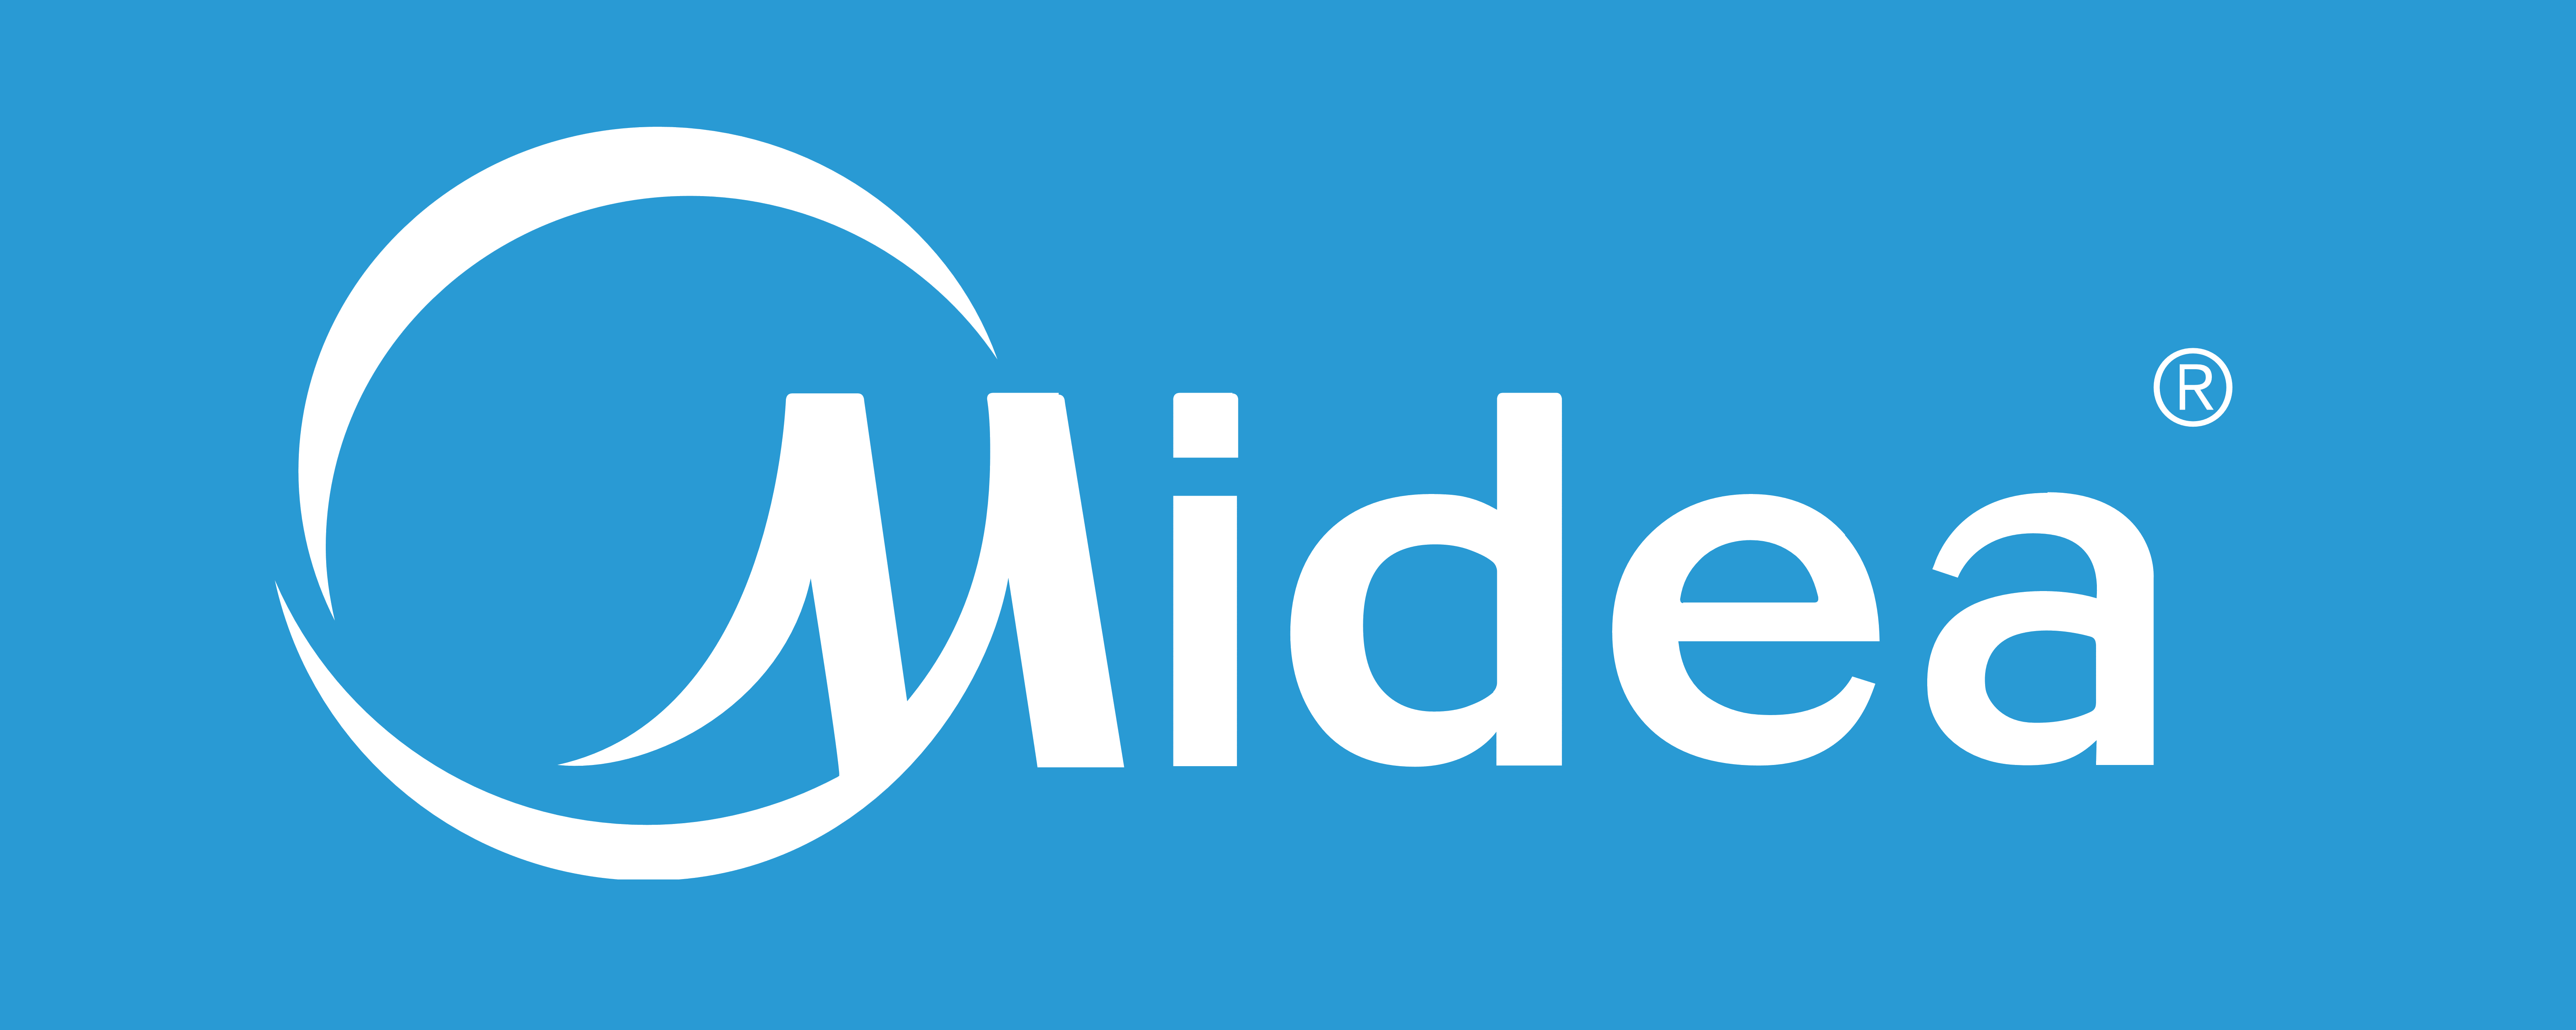 Midea MY Official